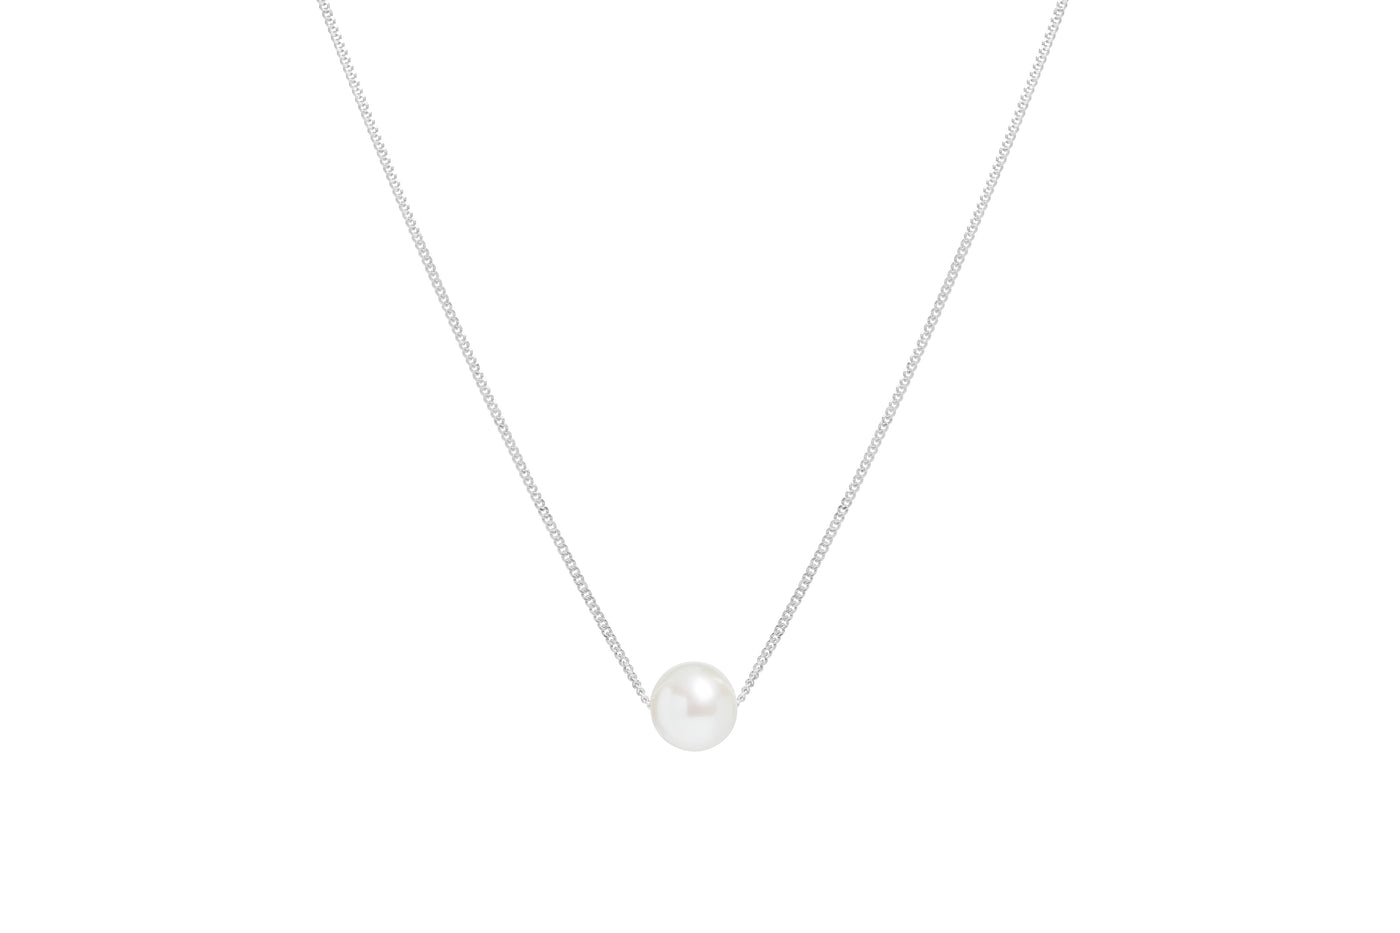 Small Floating Pearl Necklace